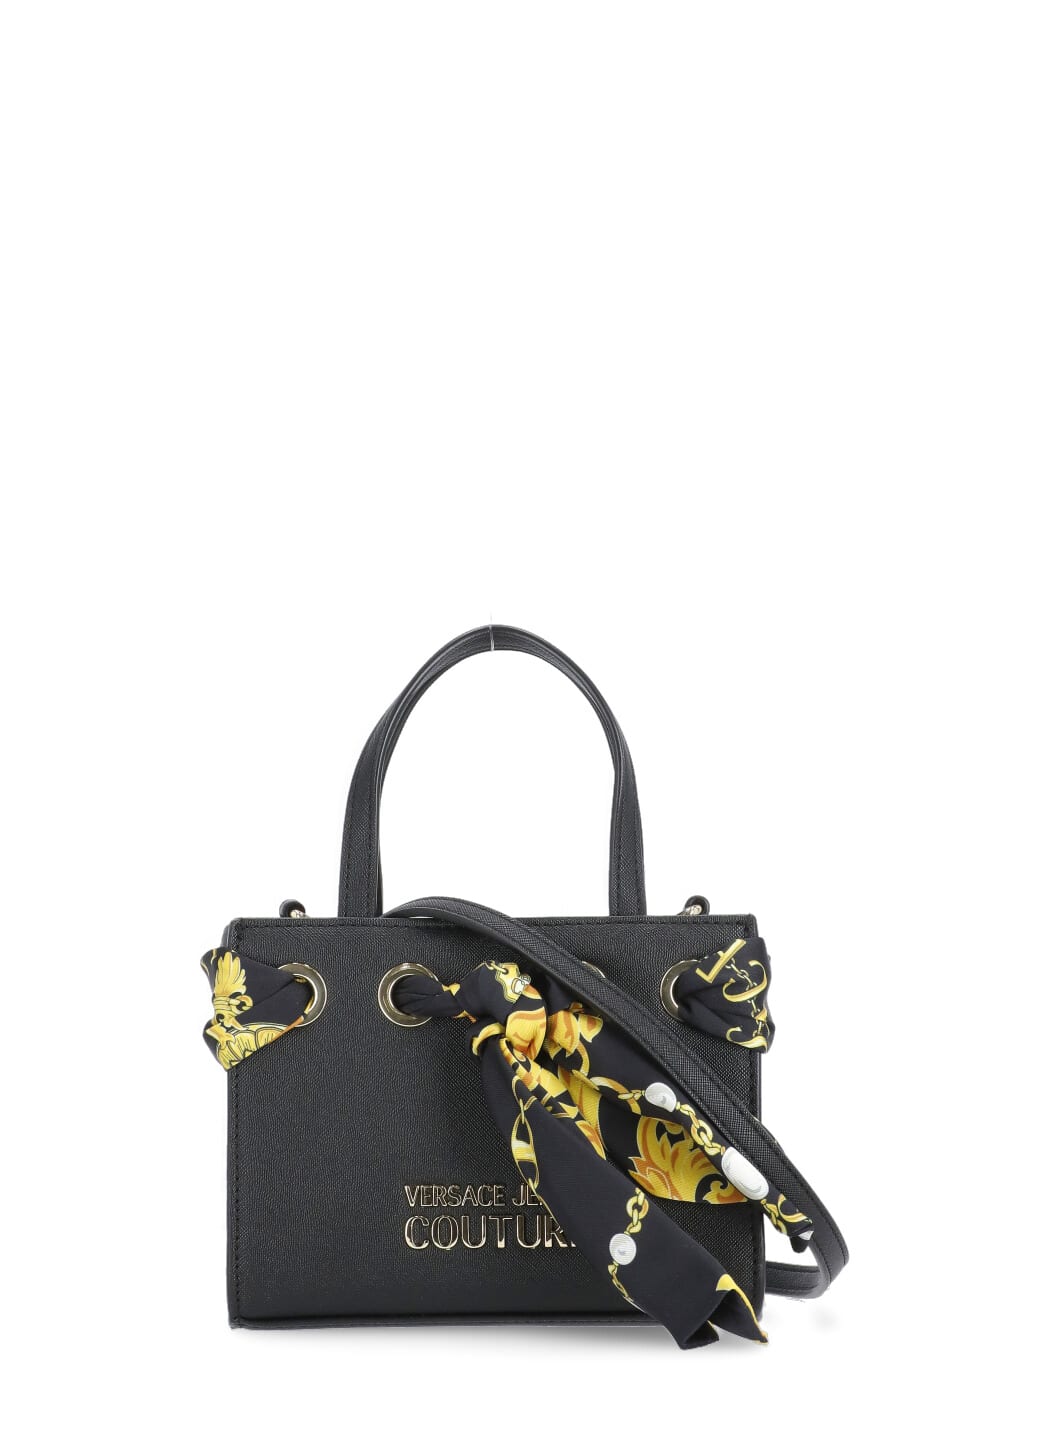 Versace Jeans Couture Thelma Classic Handbag In Black